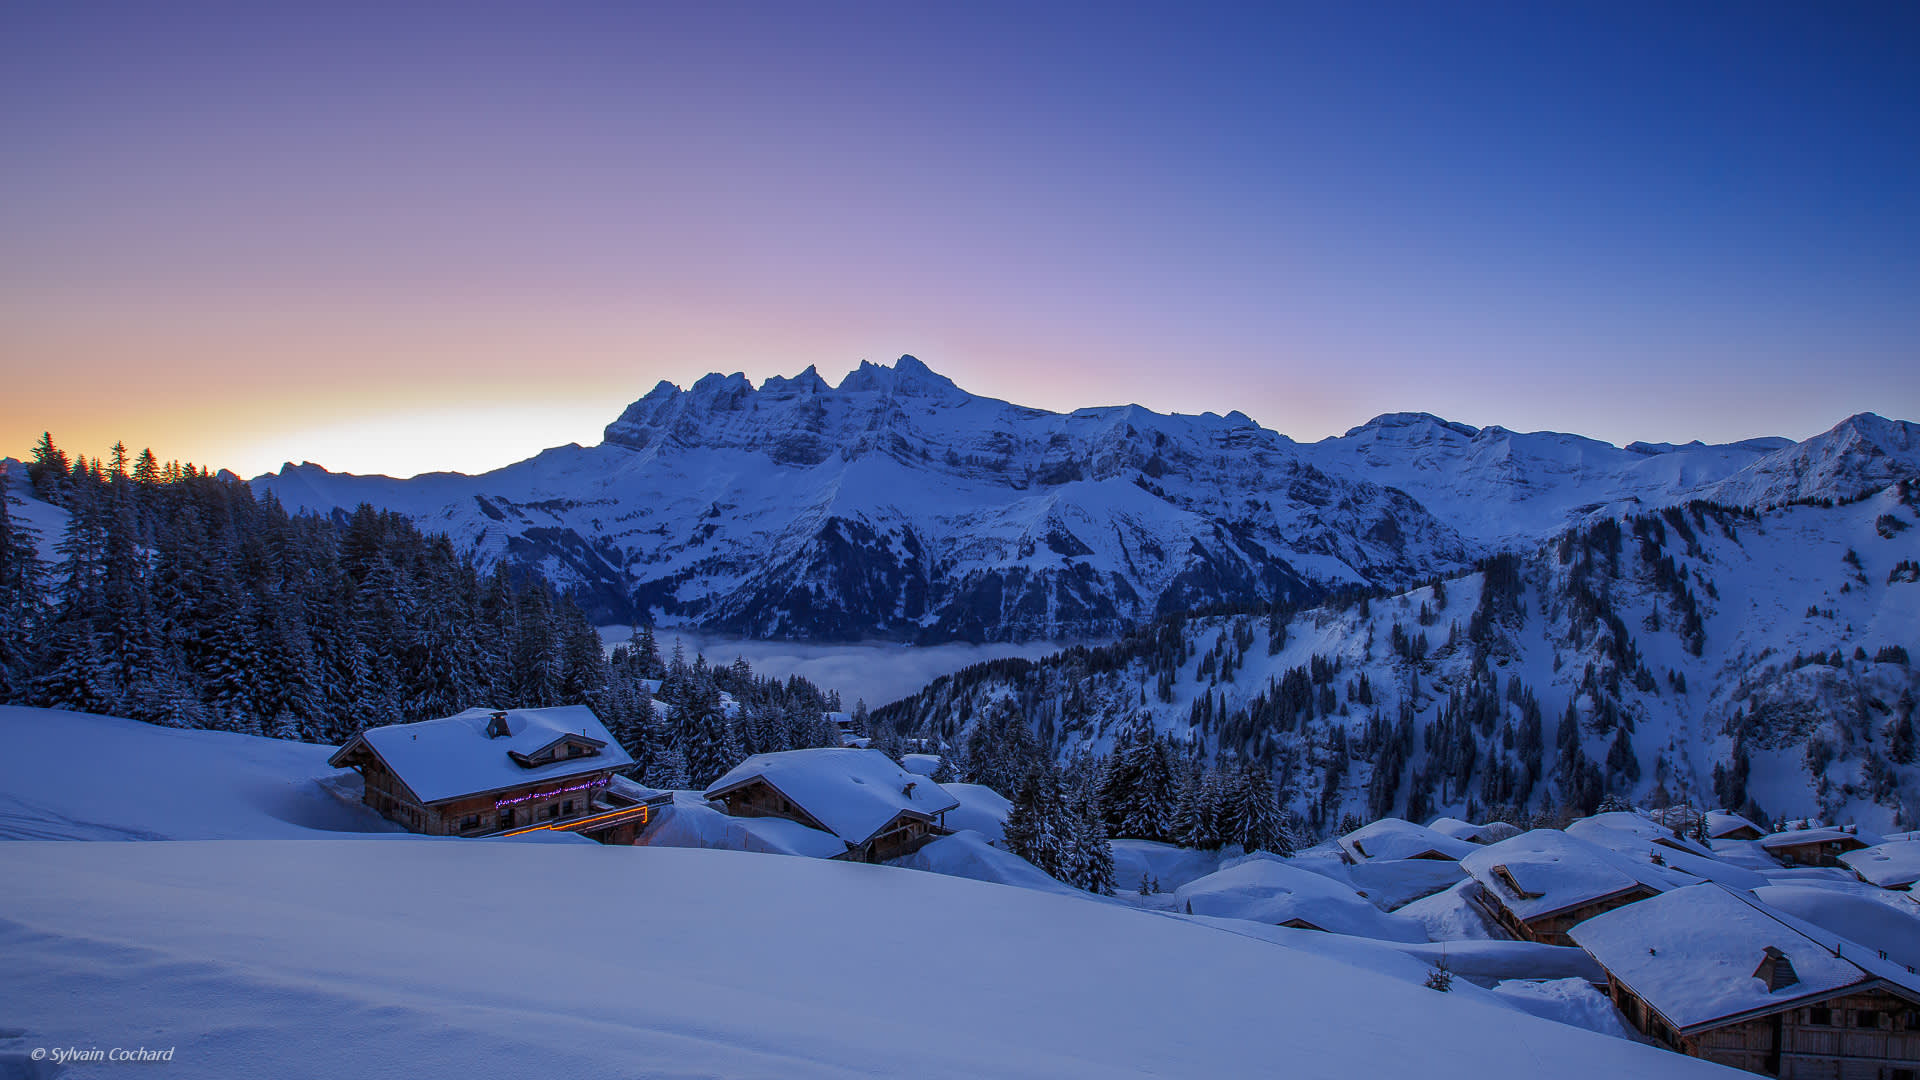 The art of après-ski in the French Alps